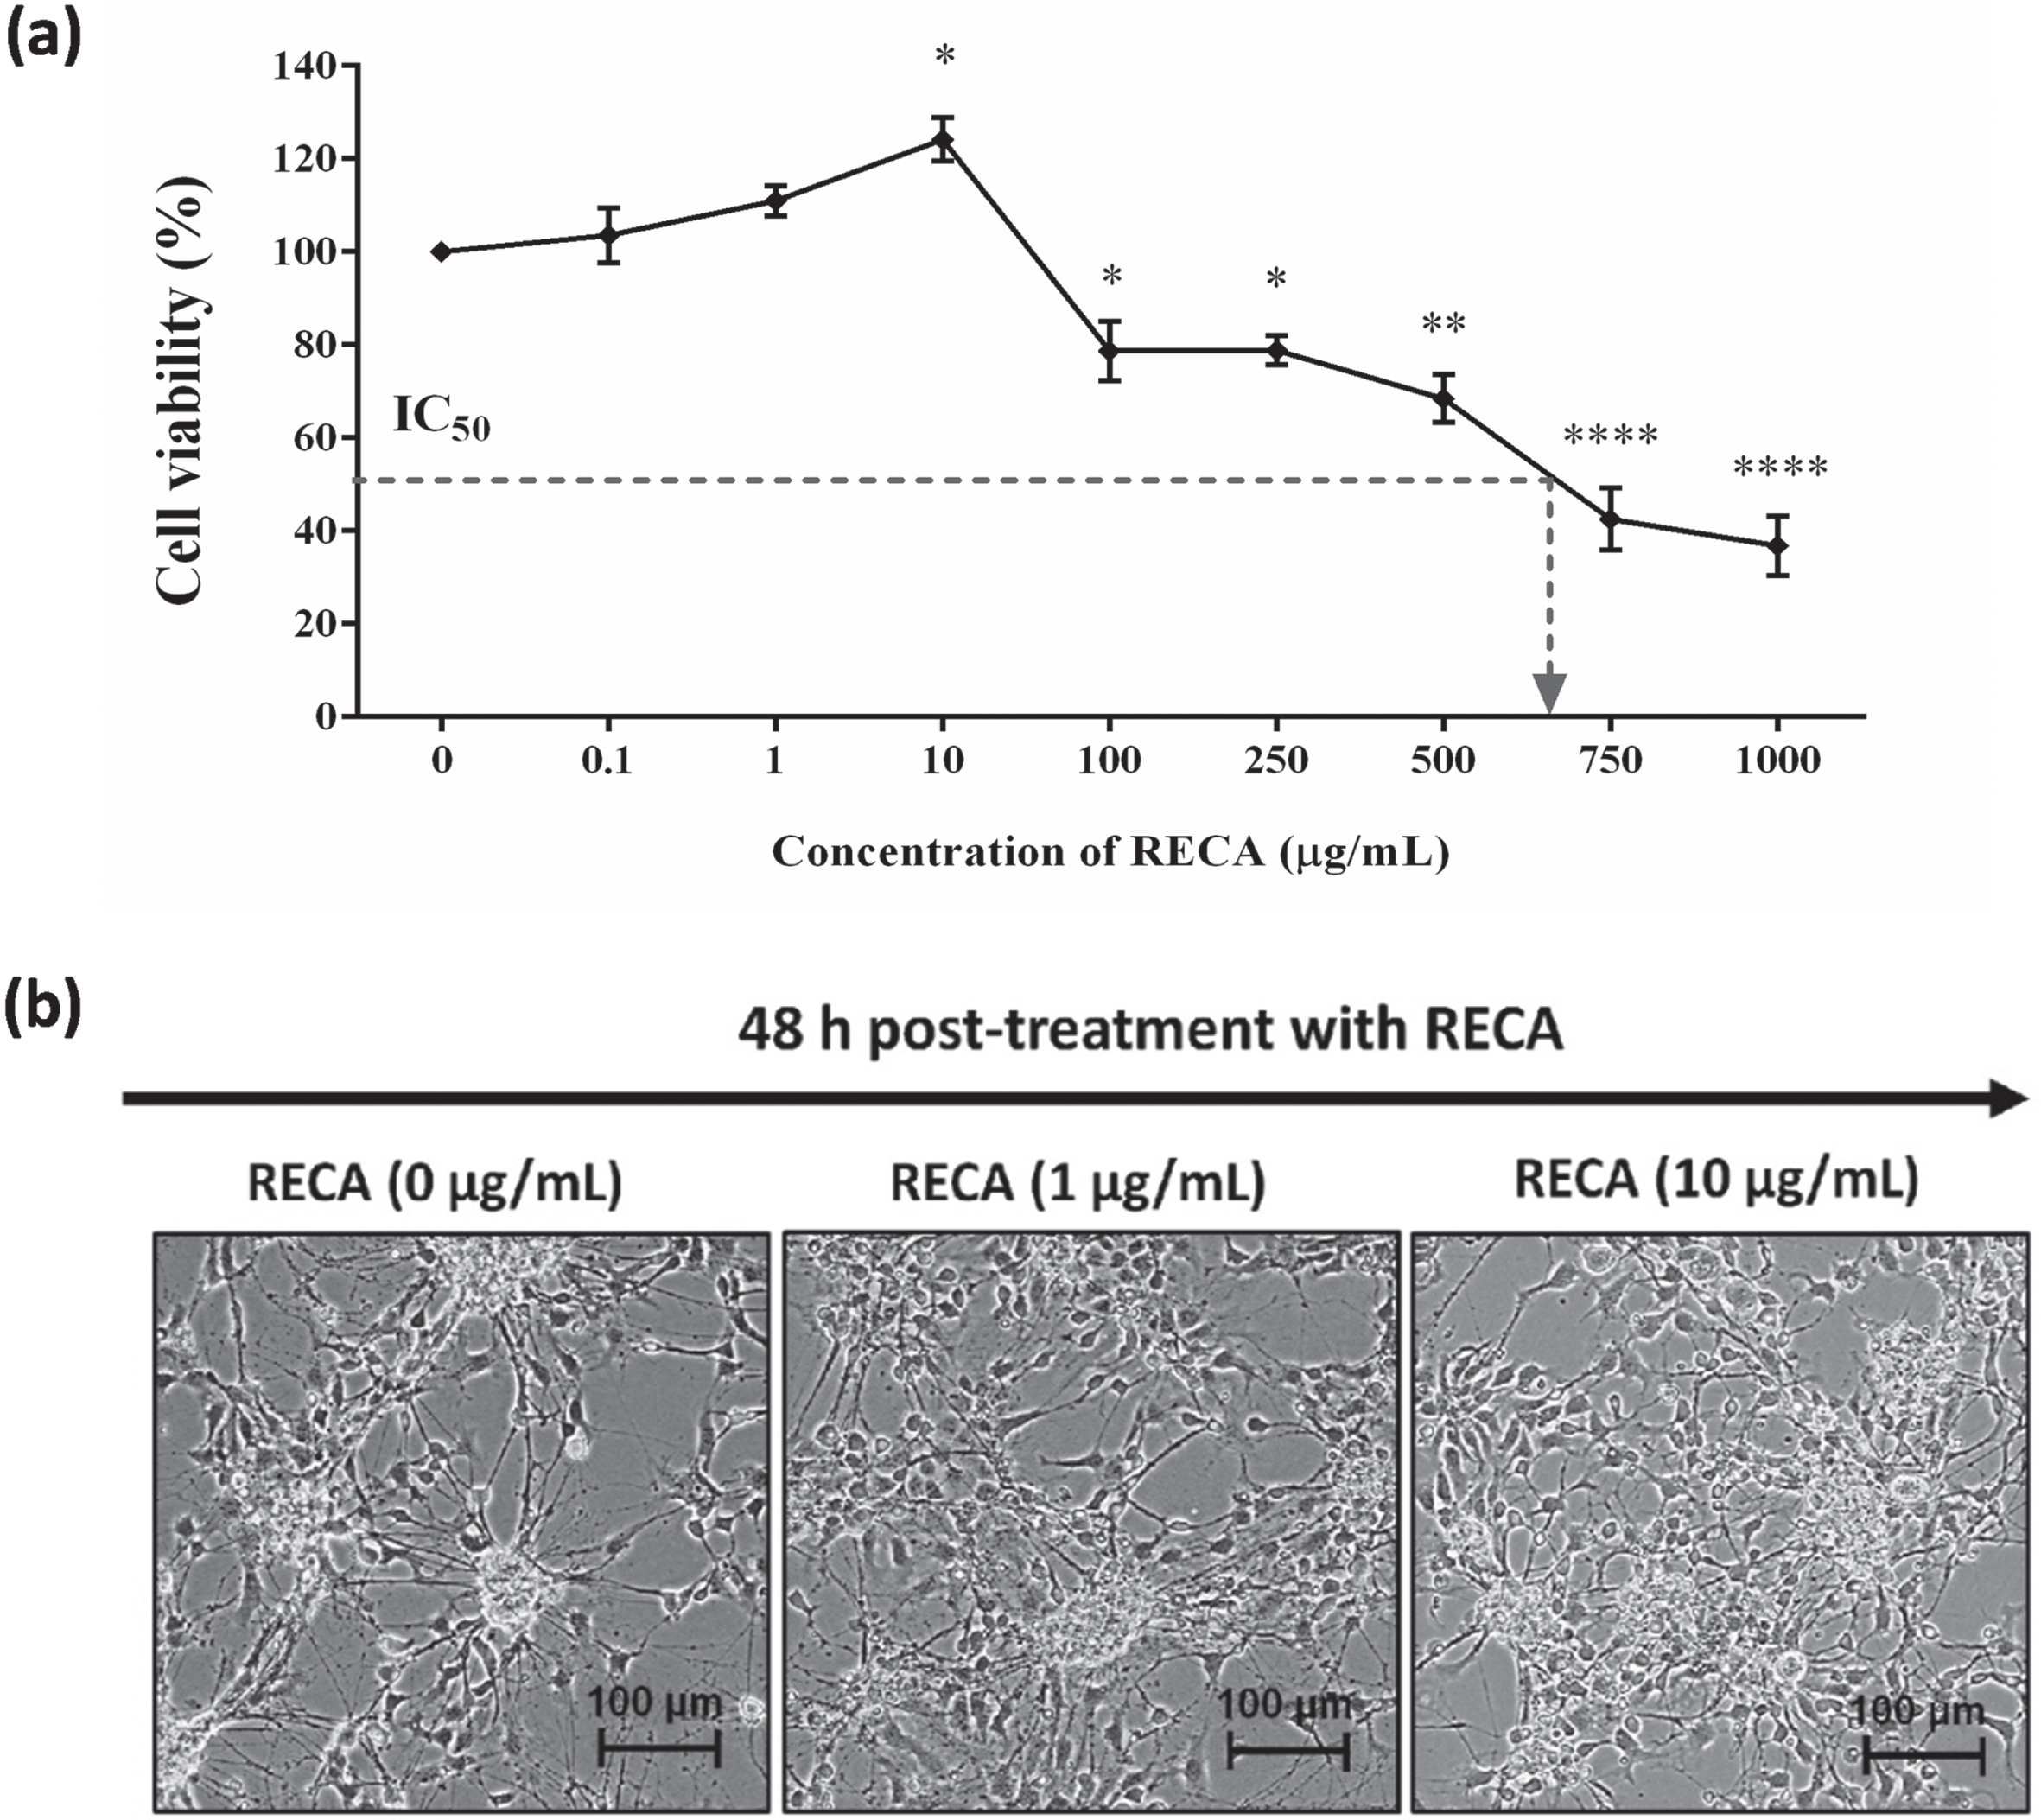 (a) Cell viability of RECA on neural-like cells derived from 46C cells by MTT assay. Mature neural-like cells were exposed to different concentrations of RECA for 48 h. Data are expressed as the percentage of mean±SEM (n = 3), where *** indicates p < 0.001, ** indicates p < 0.01, and * indicates p < 0.05 (One way ANOVA: Tukey’s test multiple comparisons) compared to untreated neural-like cells (0μg/mL of RECA). (b) Representative microscopy images of 46C-derived neural-like cells treated with 0, 1, 10μg/mL of RECA. Note the increase in neurite length and the number of branches in cells treated with RECA. The scale bars represent 100μm for micrographs (magnification 20×).